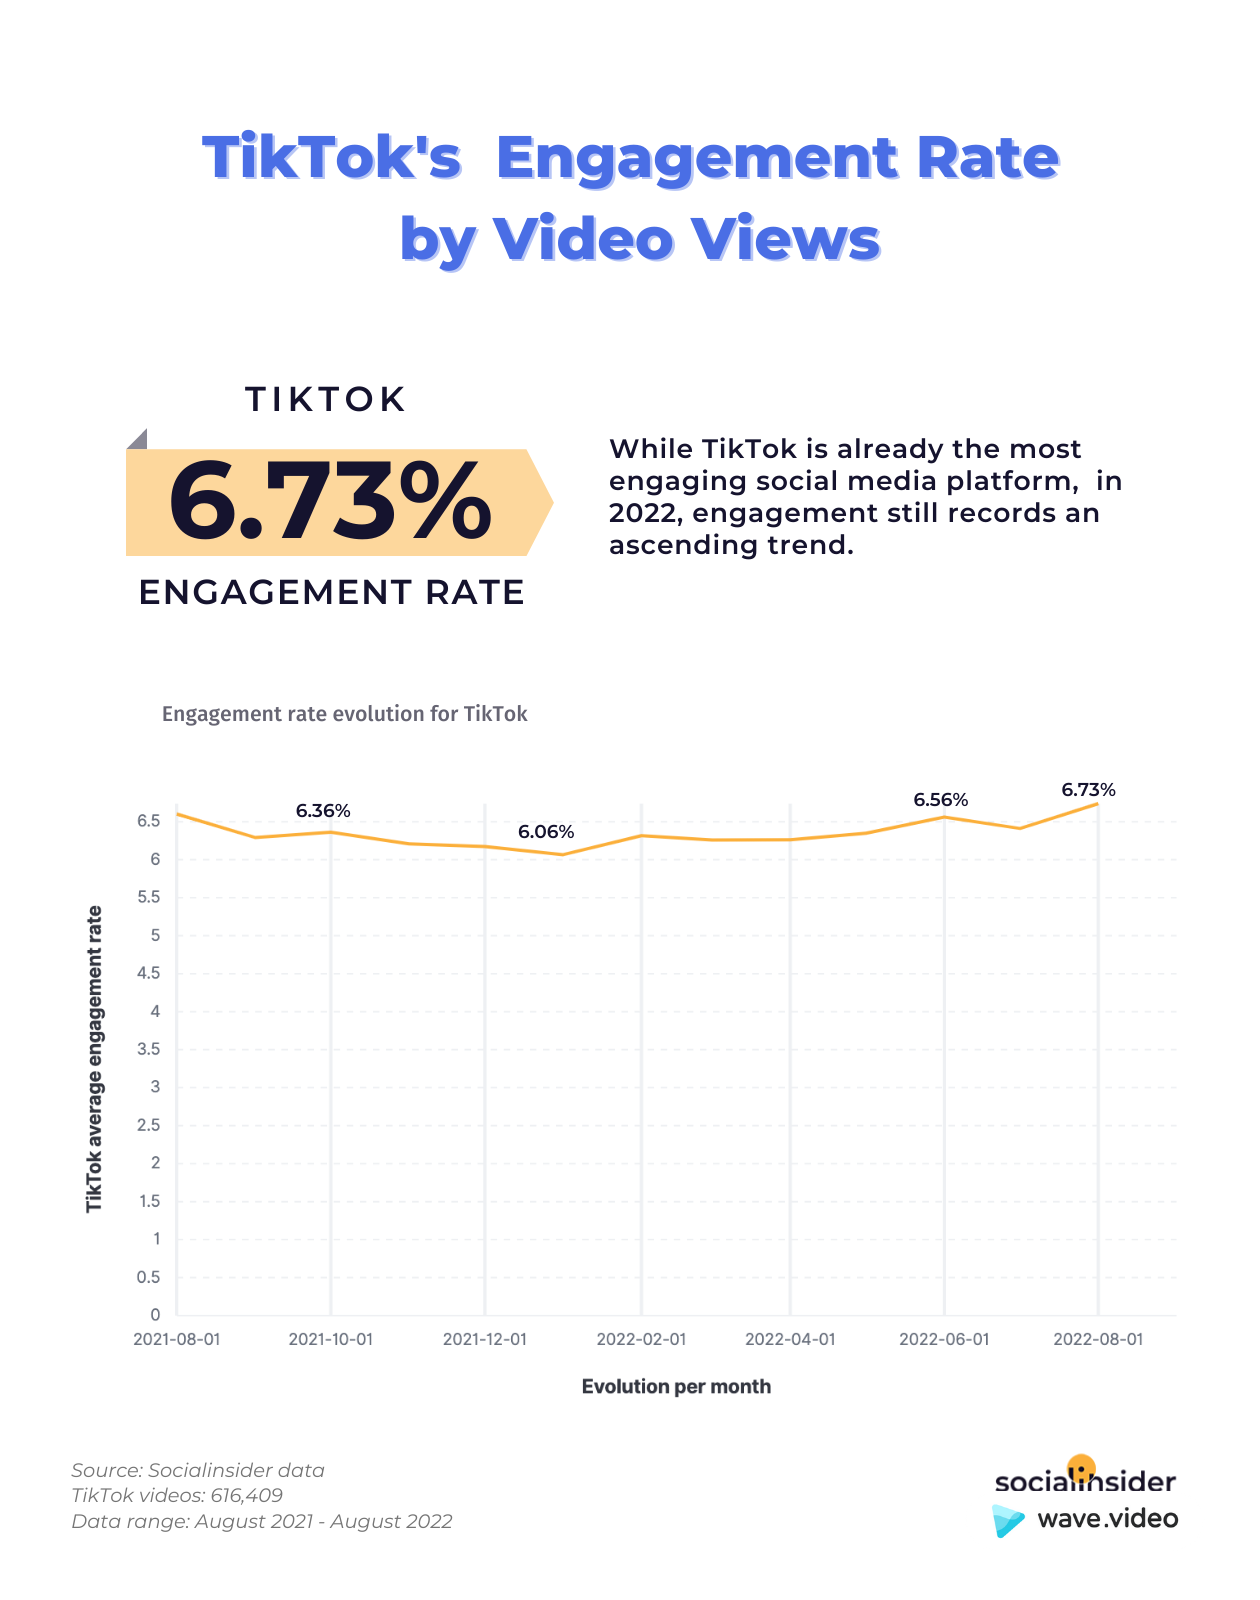 A chart about tiktok's engagement rate by video views